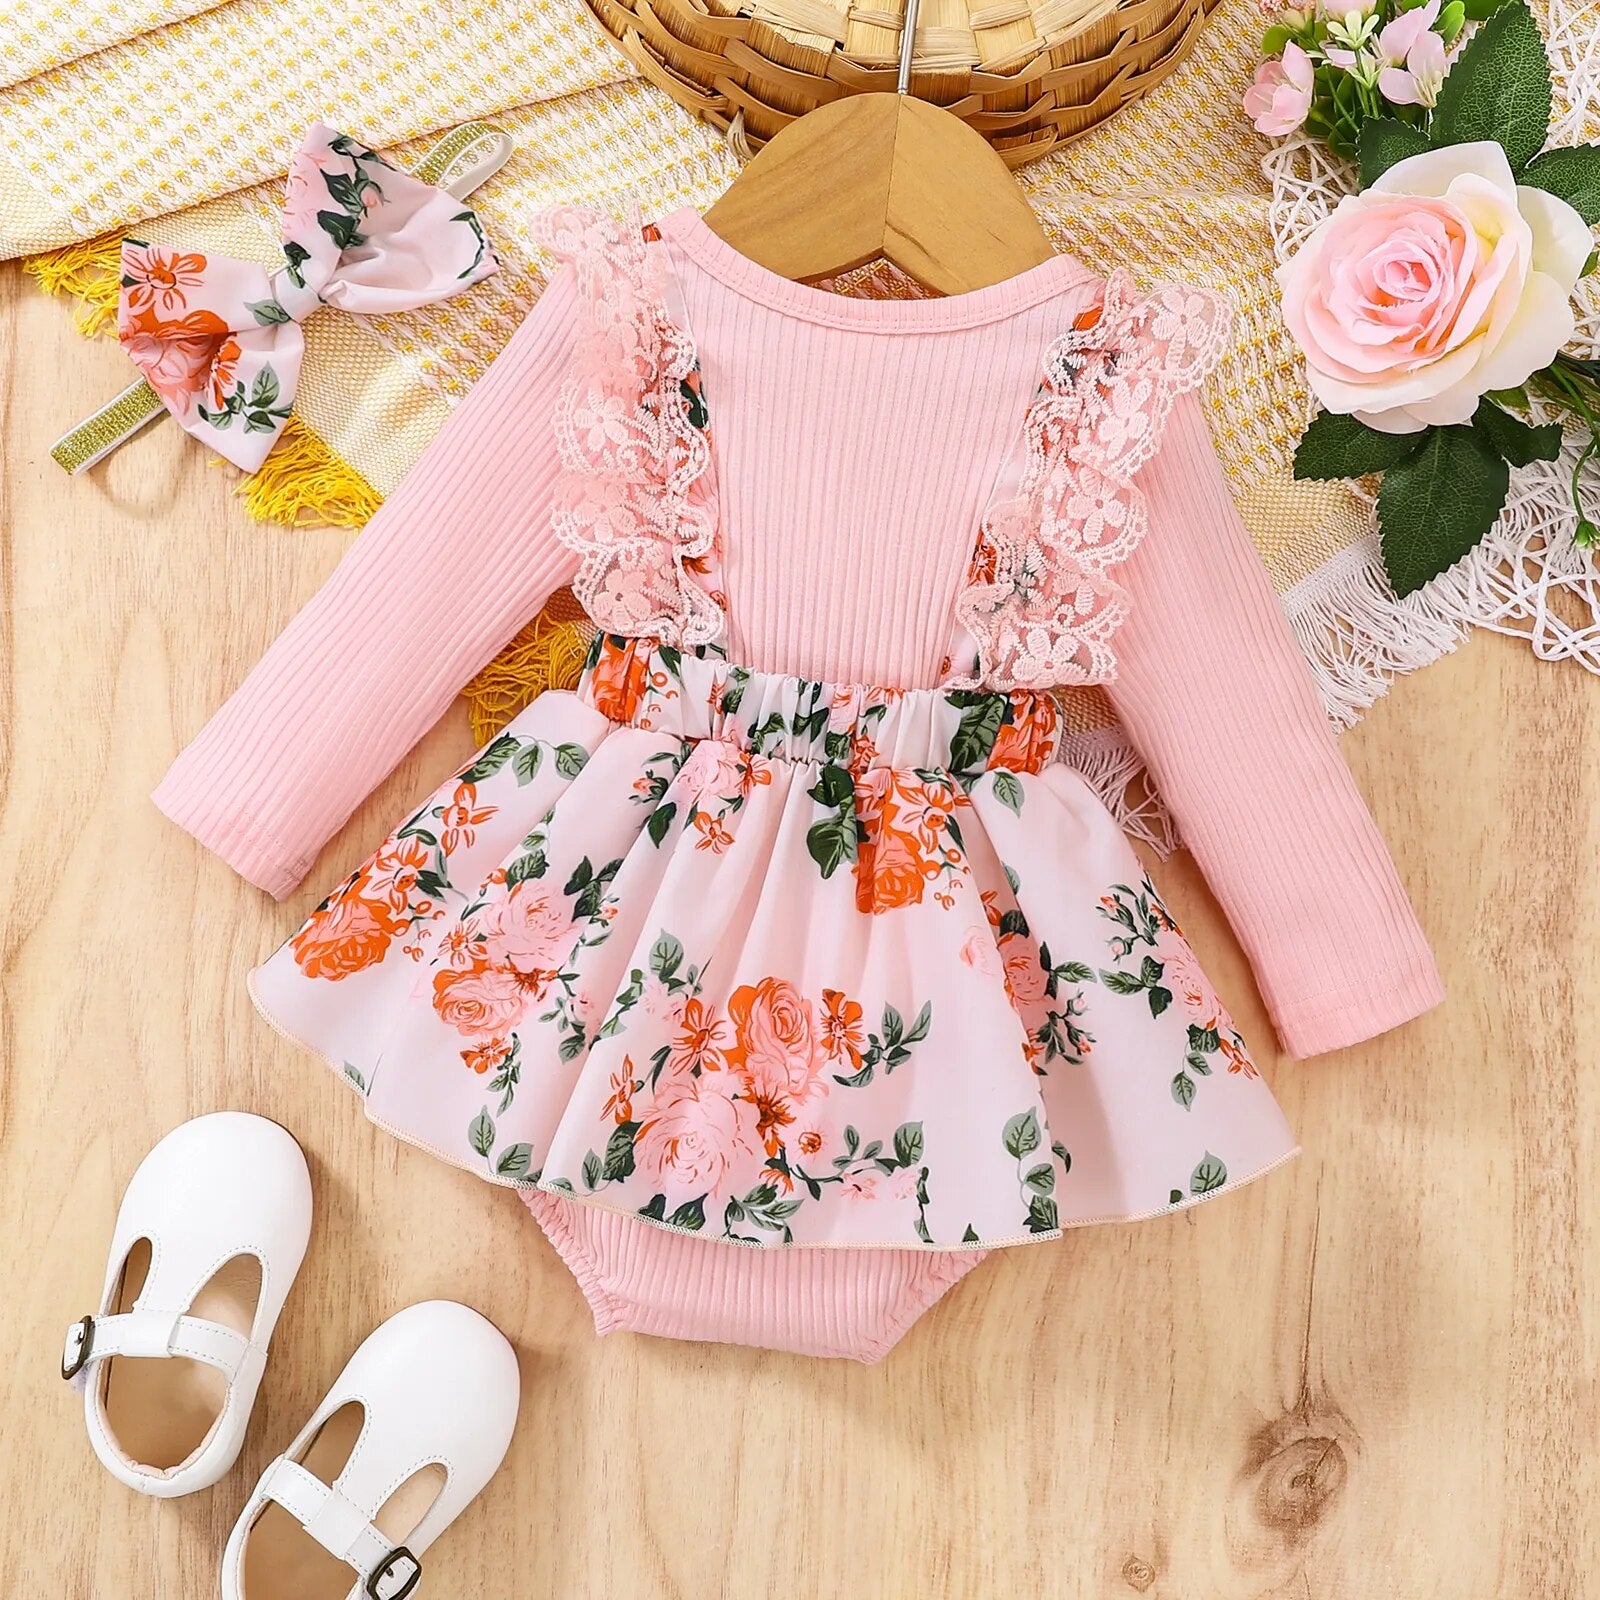 Baby Girl Romper: Floral Lace Jumpsuit with Bow Detailing